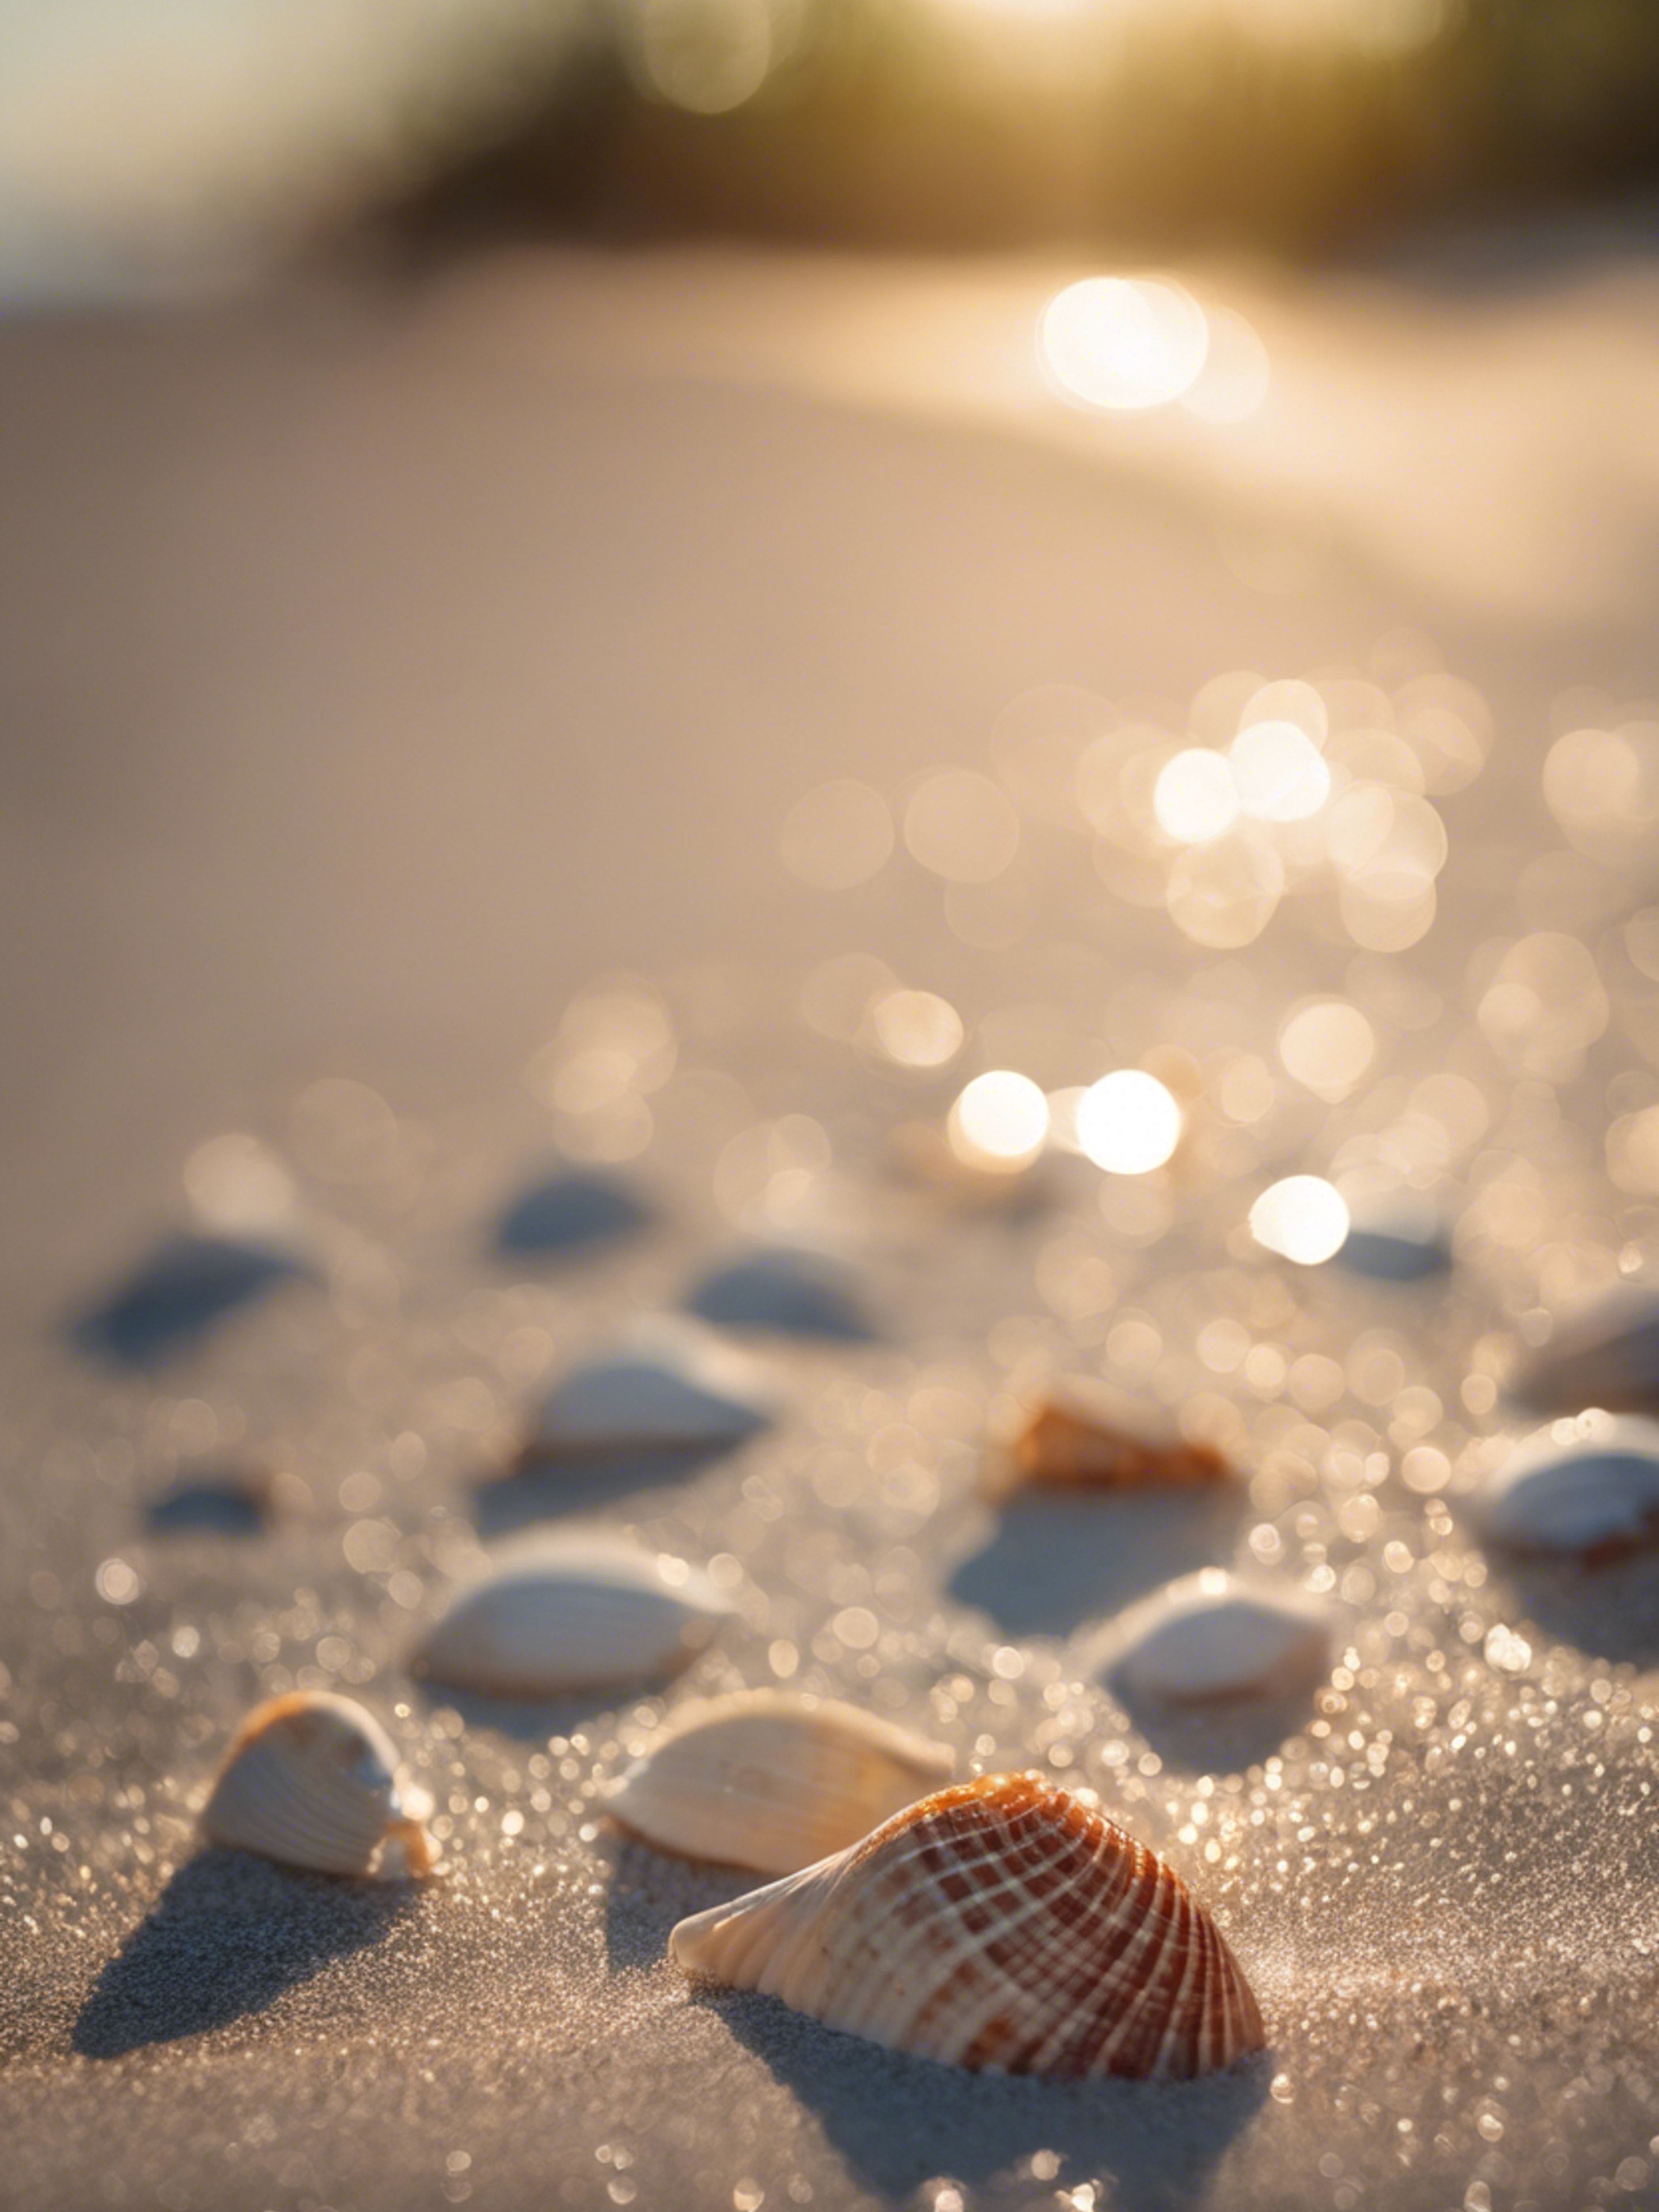 A tranquil morning on Sanibel Island, with seashells scattered along the beach as the sun rises.壁紙[e290592bfe0b4de5a139]